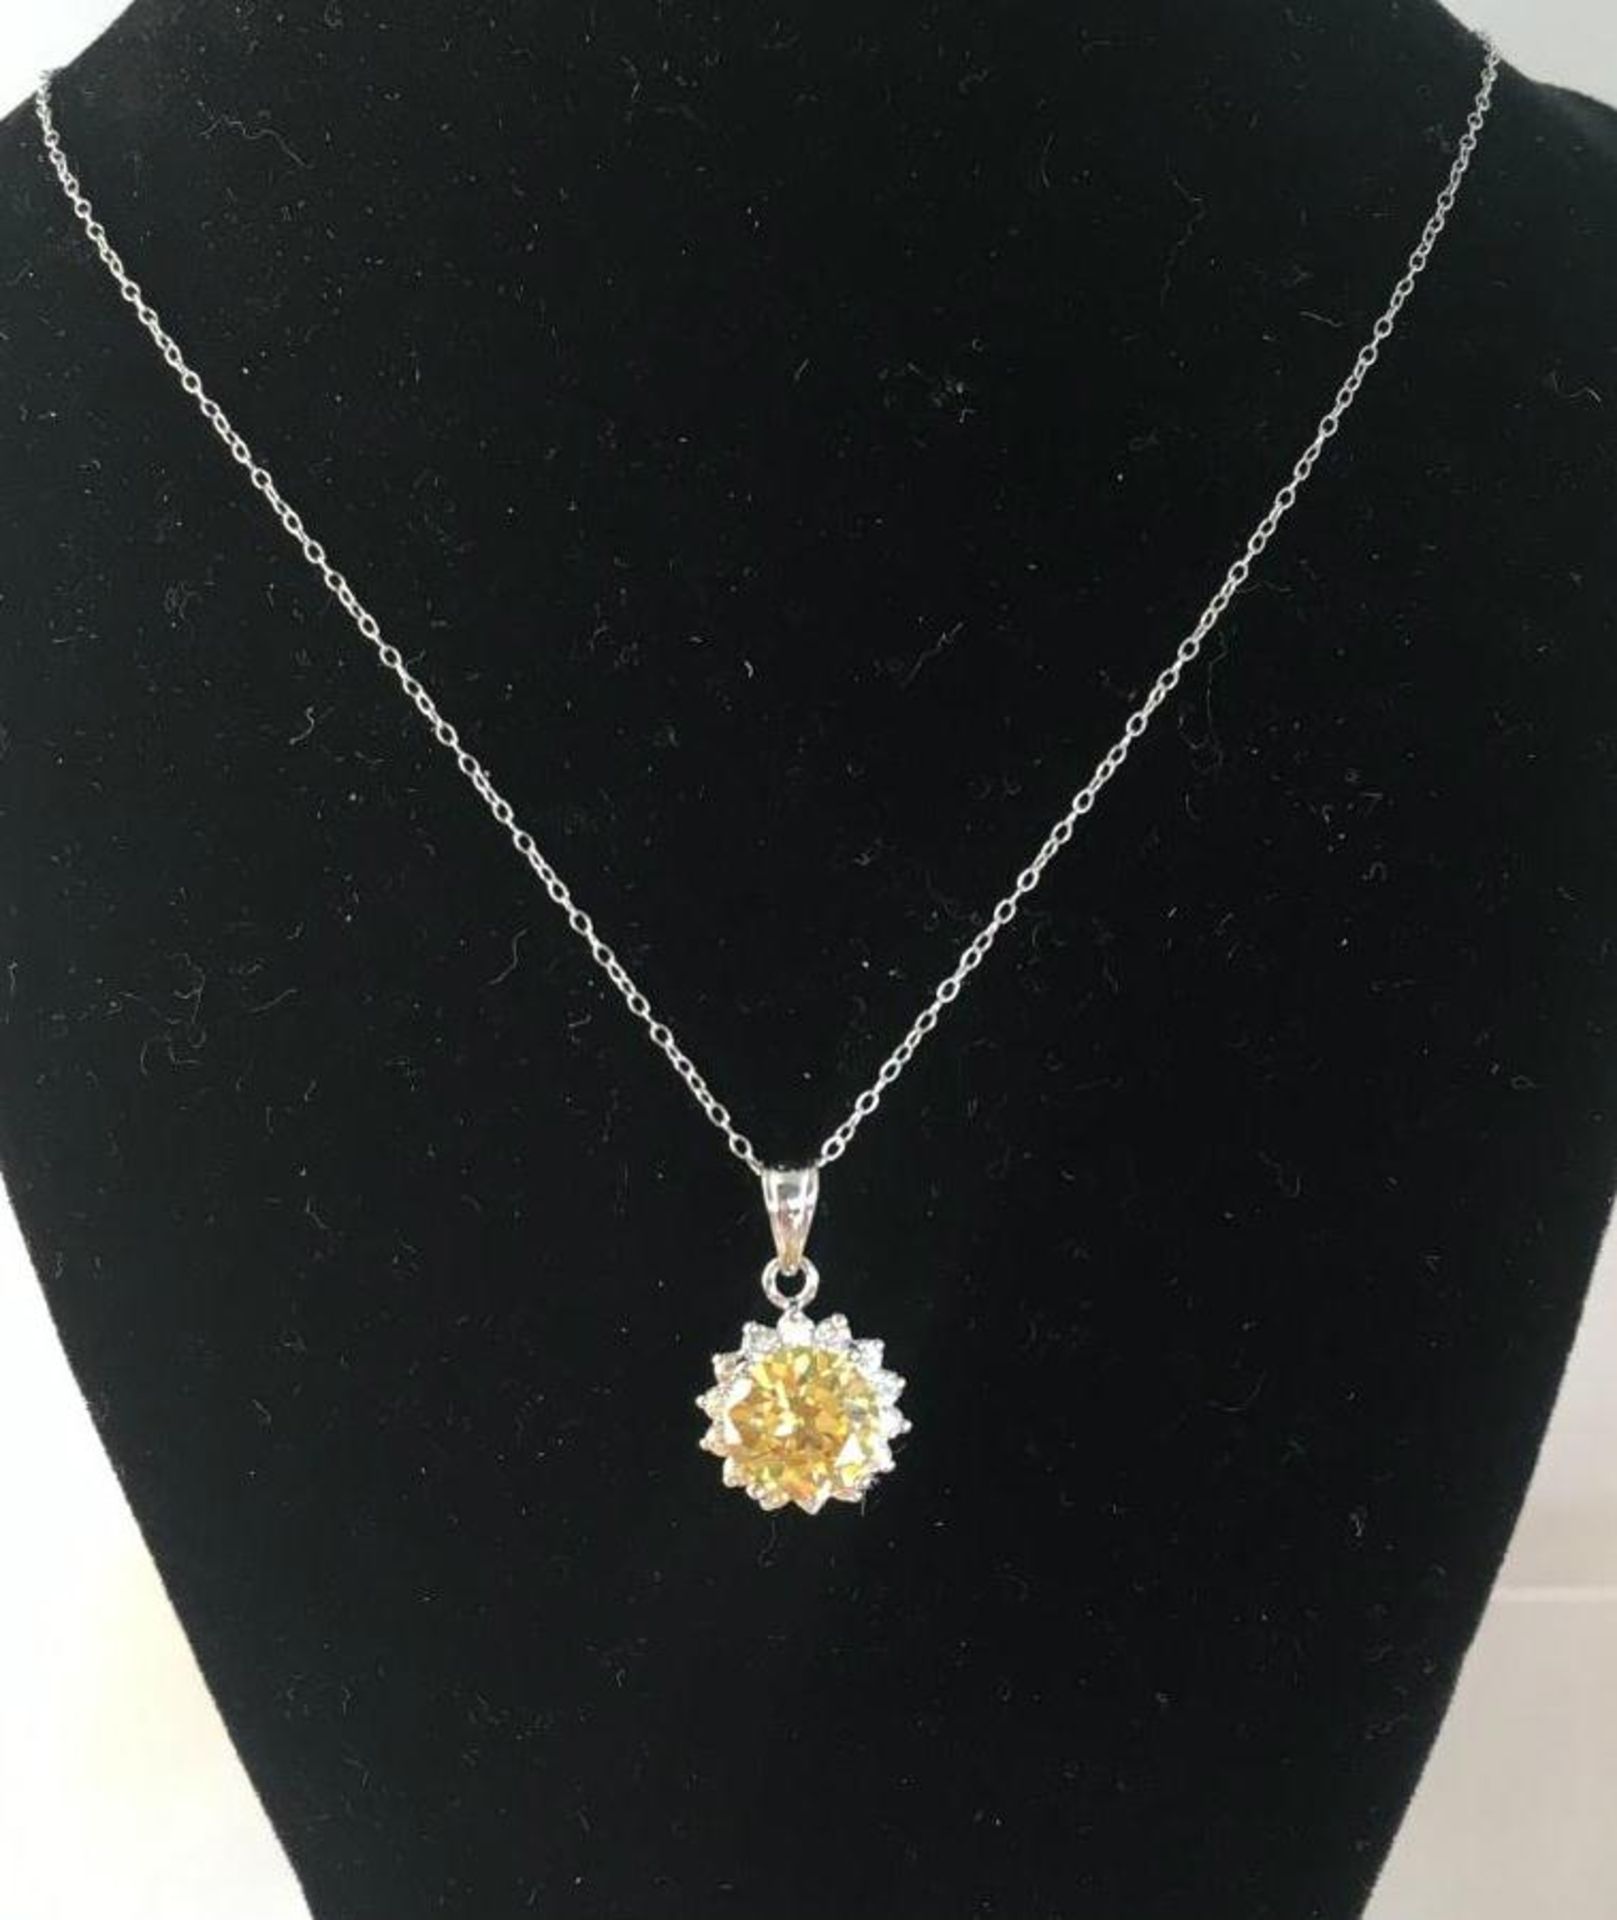 Simulated Citrine and Diamond Pendant with chain in 925 Silver